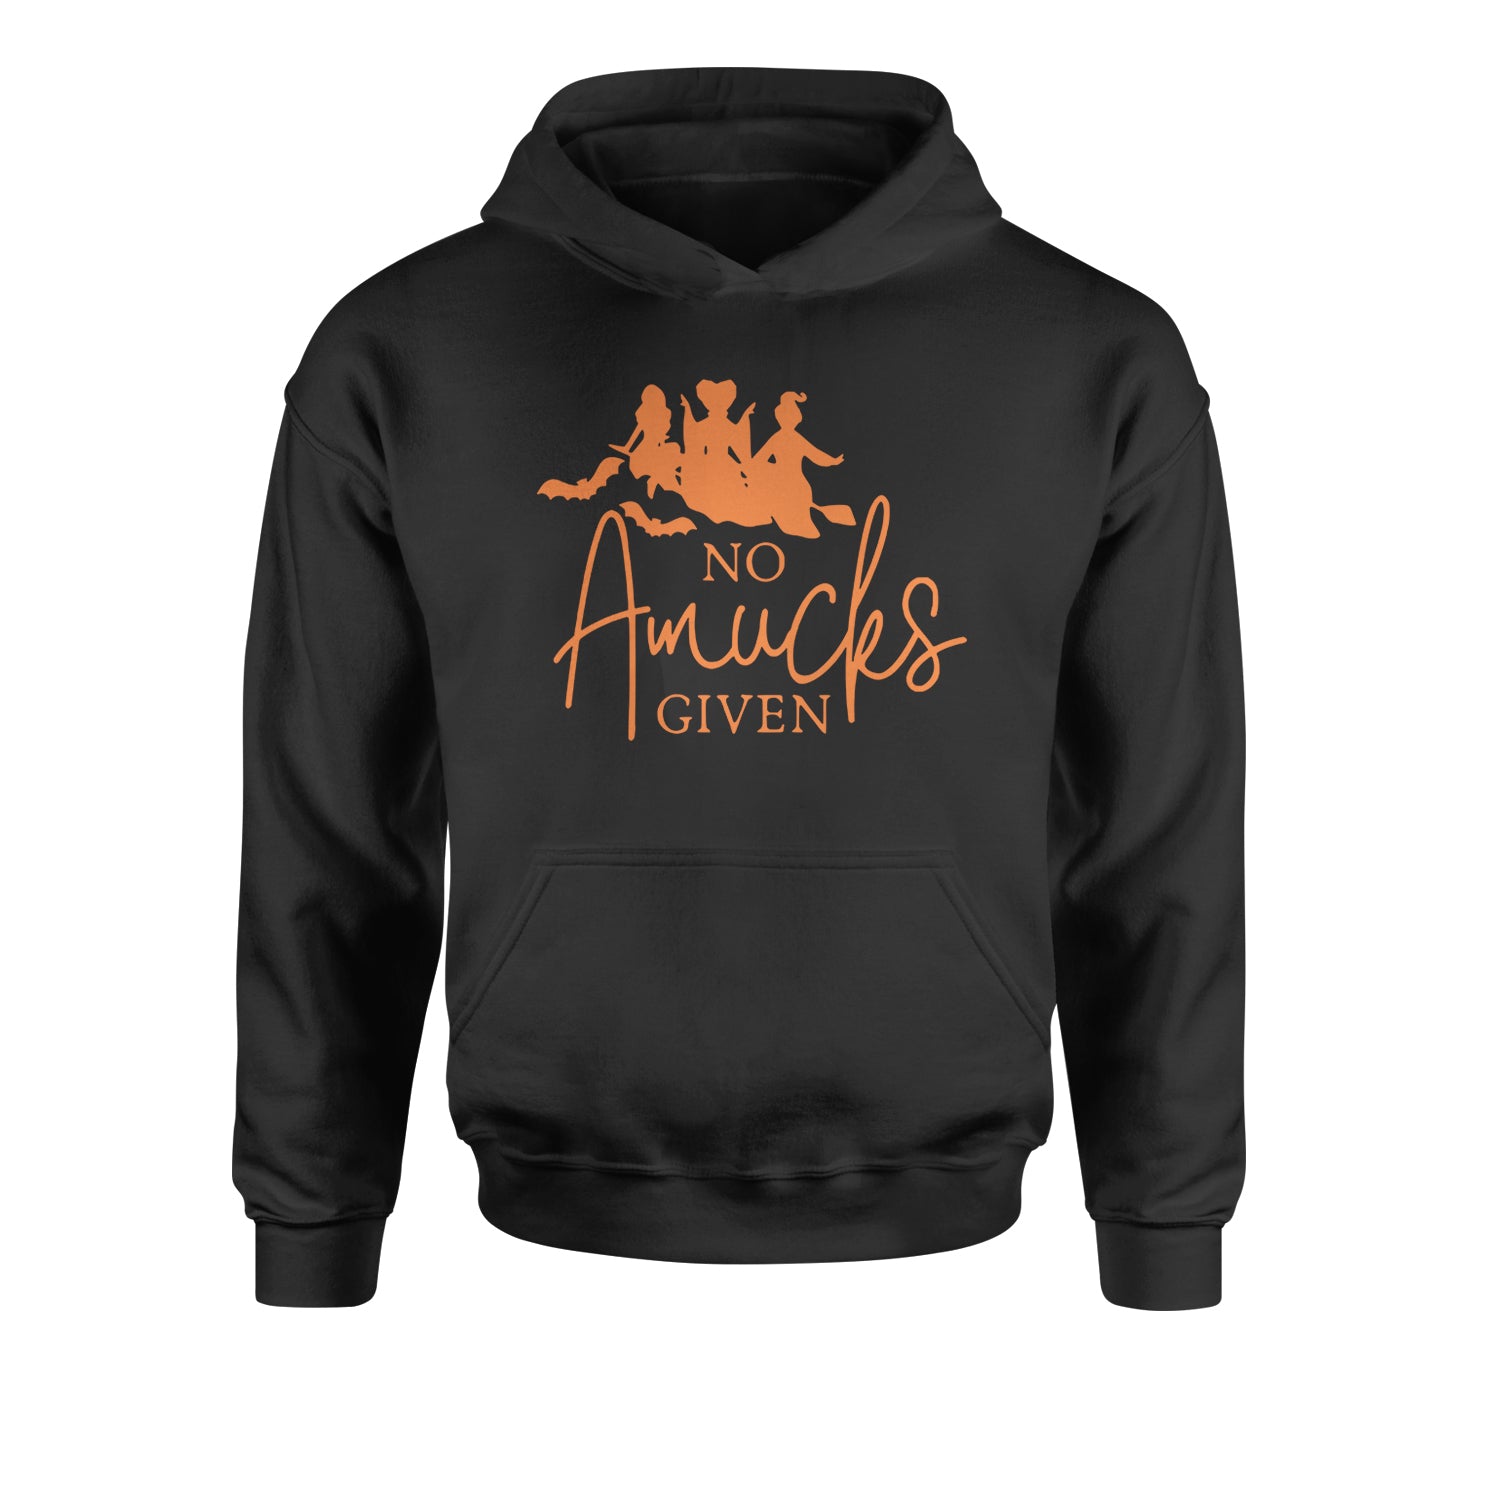 No Amucks Given Hocus Pocus Youth-Sized Hoodie descendants, enchanted, eve, hallows, hocus, or, pocus, sanderson, sisters, treat, trick, witches by Expression Tees